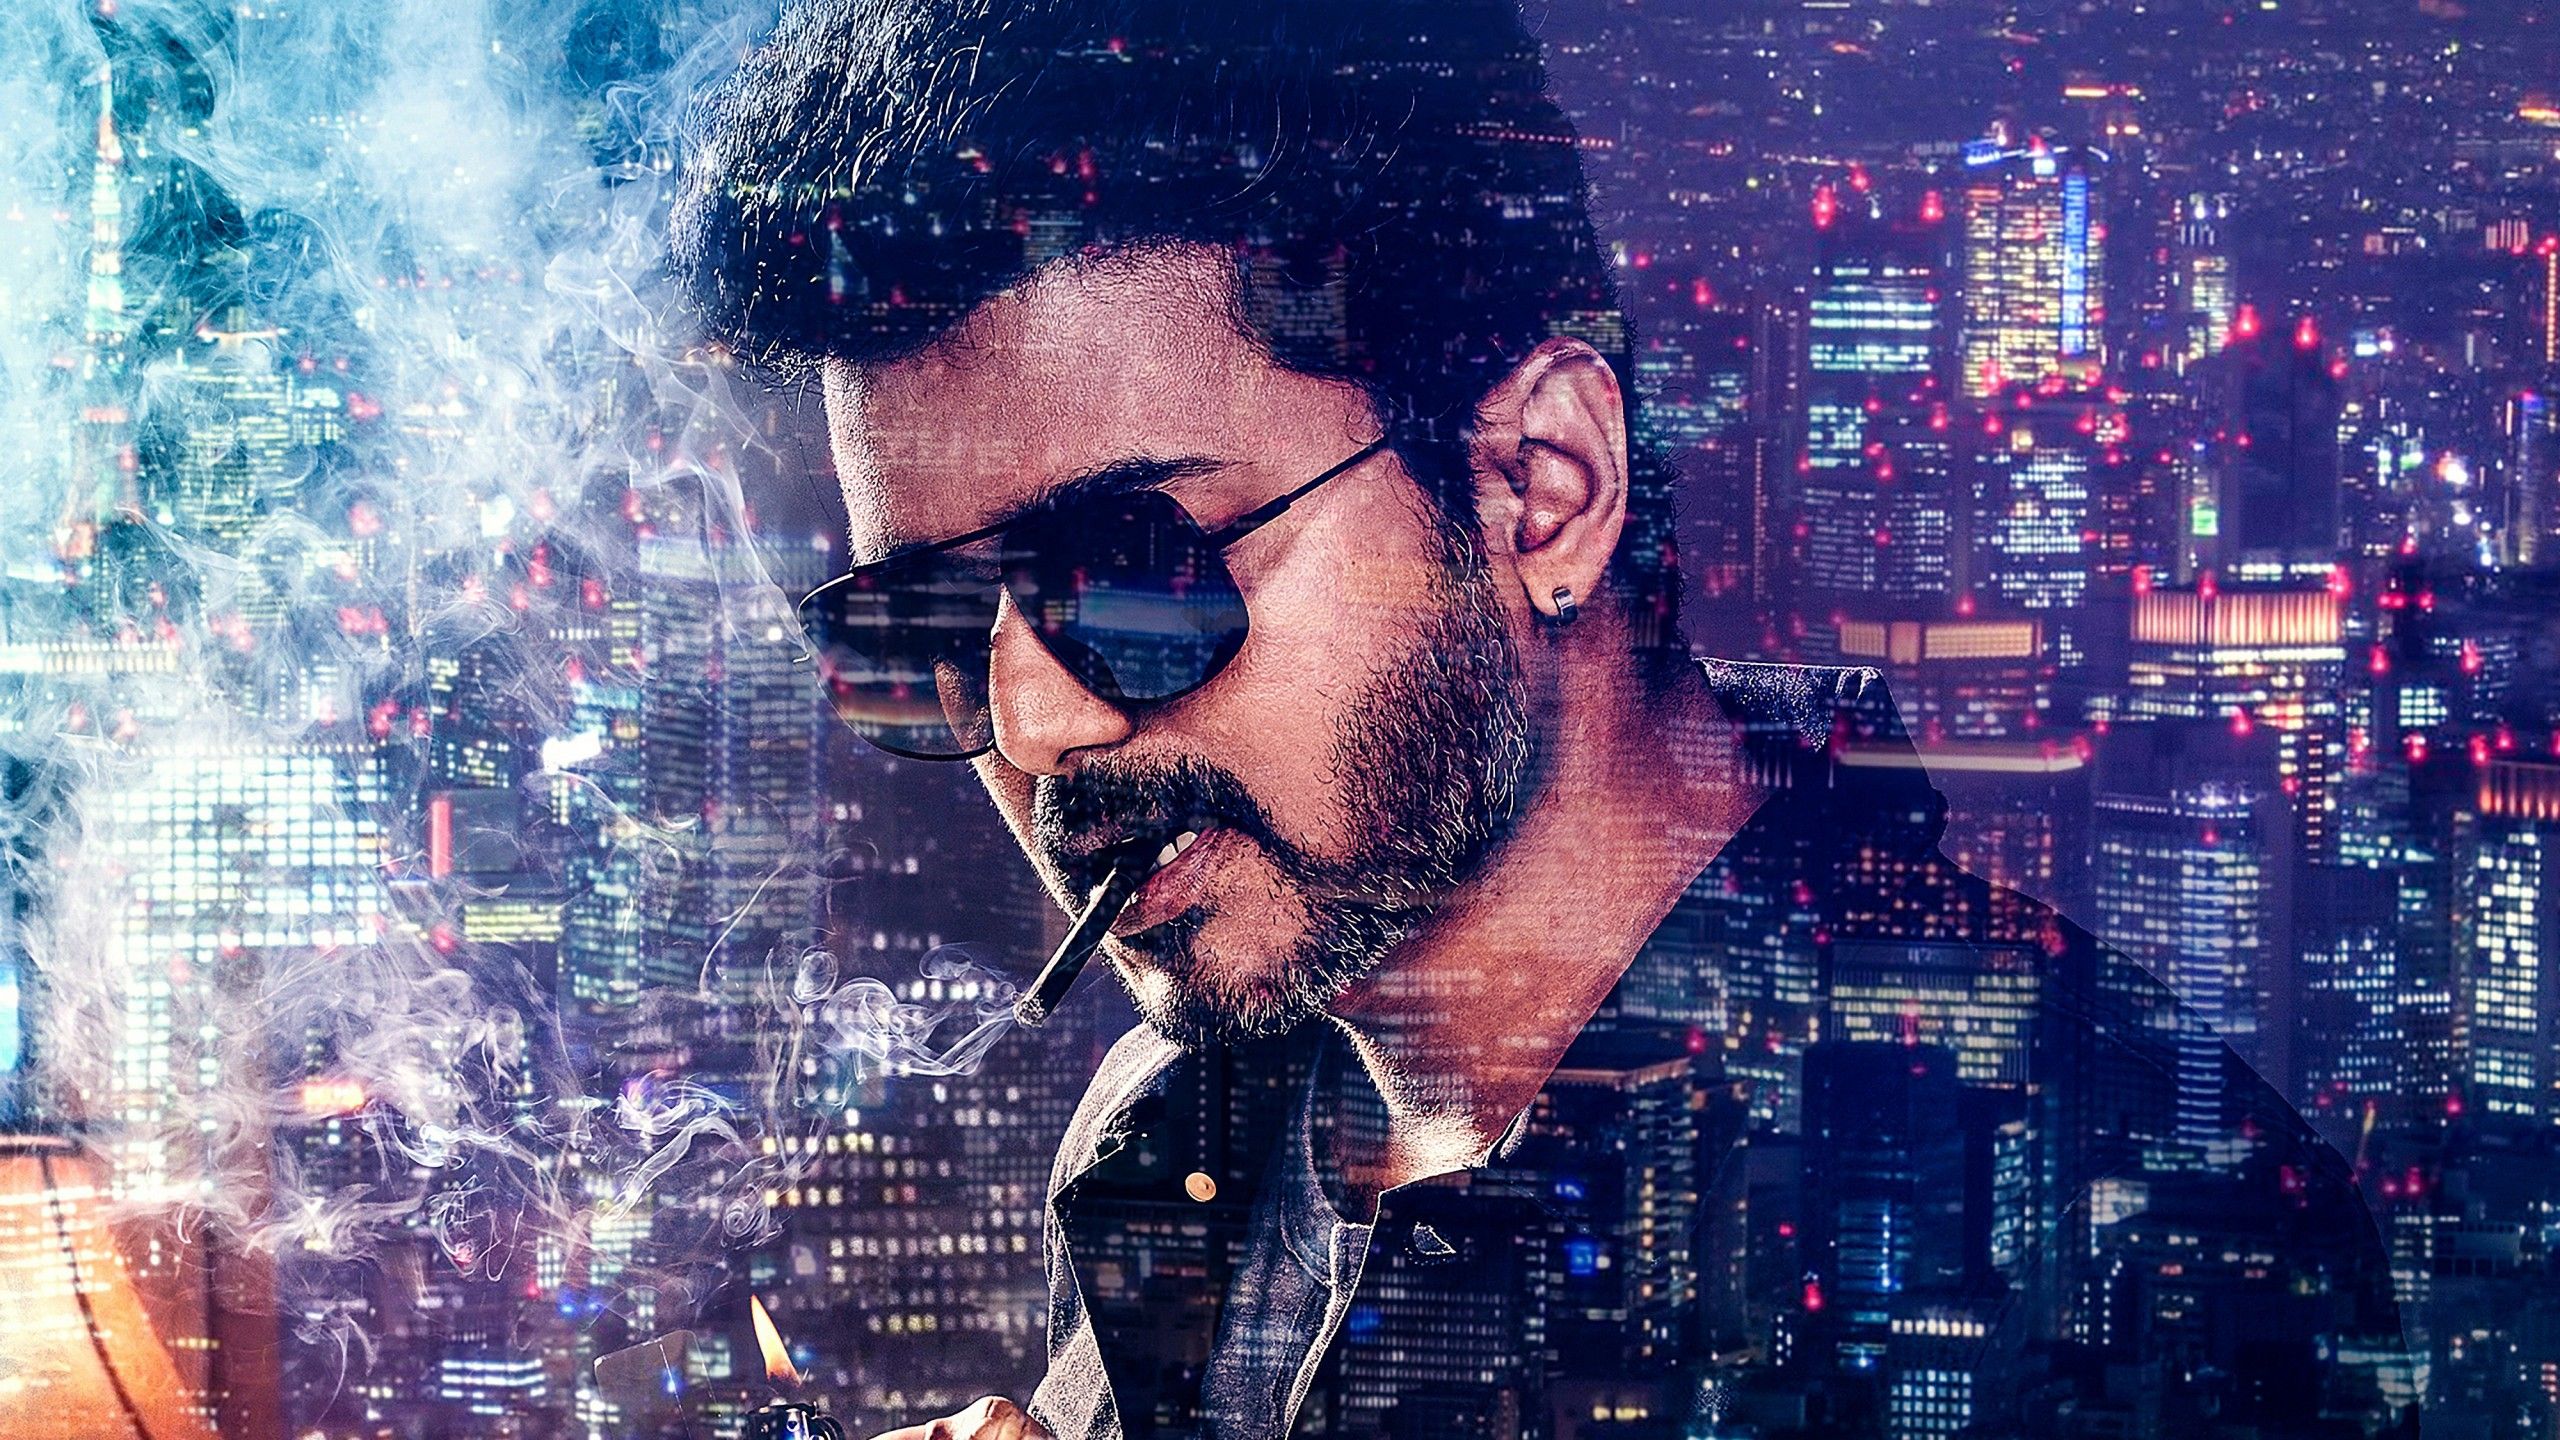 Wallpaper Vijay, Sarkar, Tamil movie, HD, 4K, Movies / Indian,. Wallpaper for iPhone, Android, Mobile and Desktop